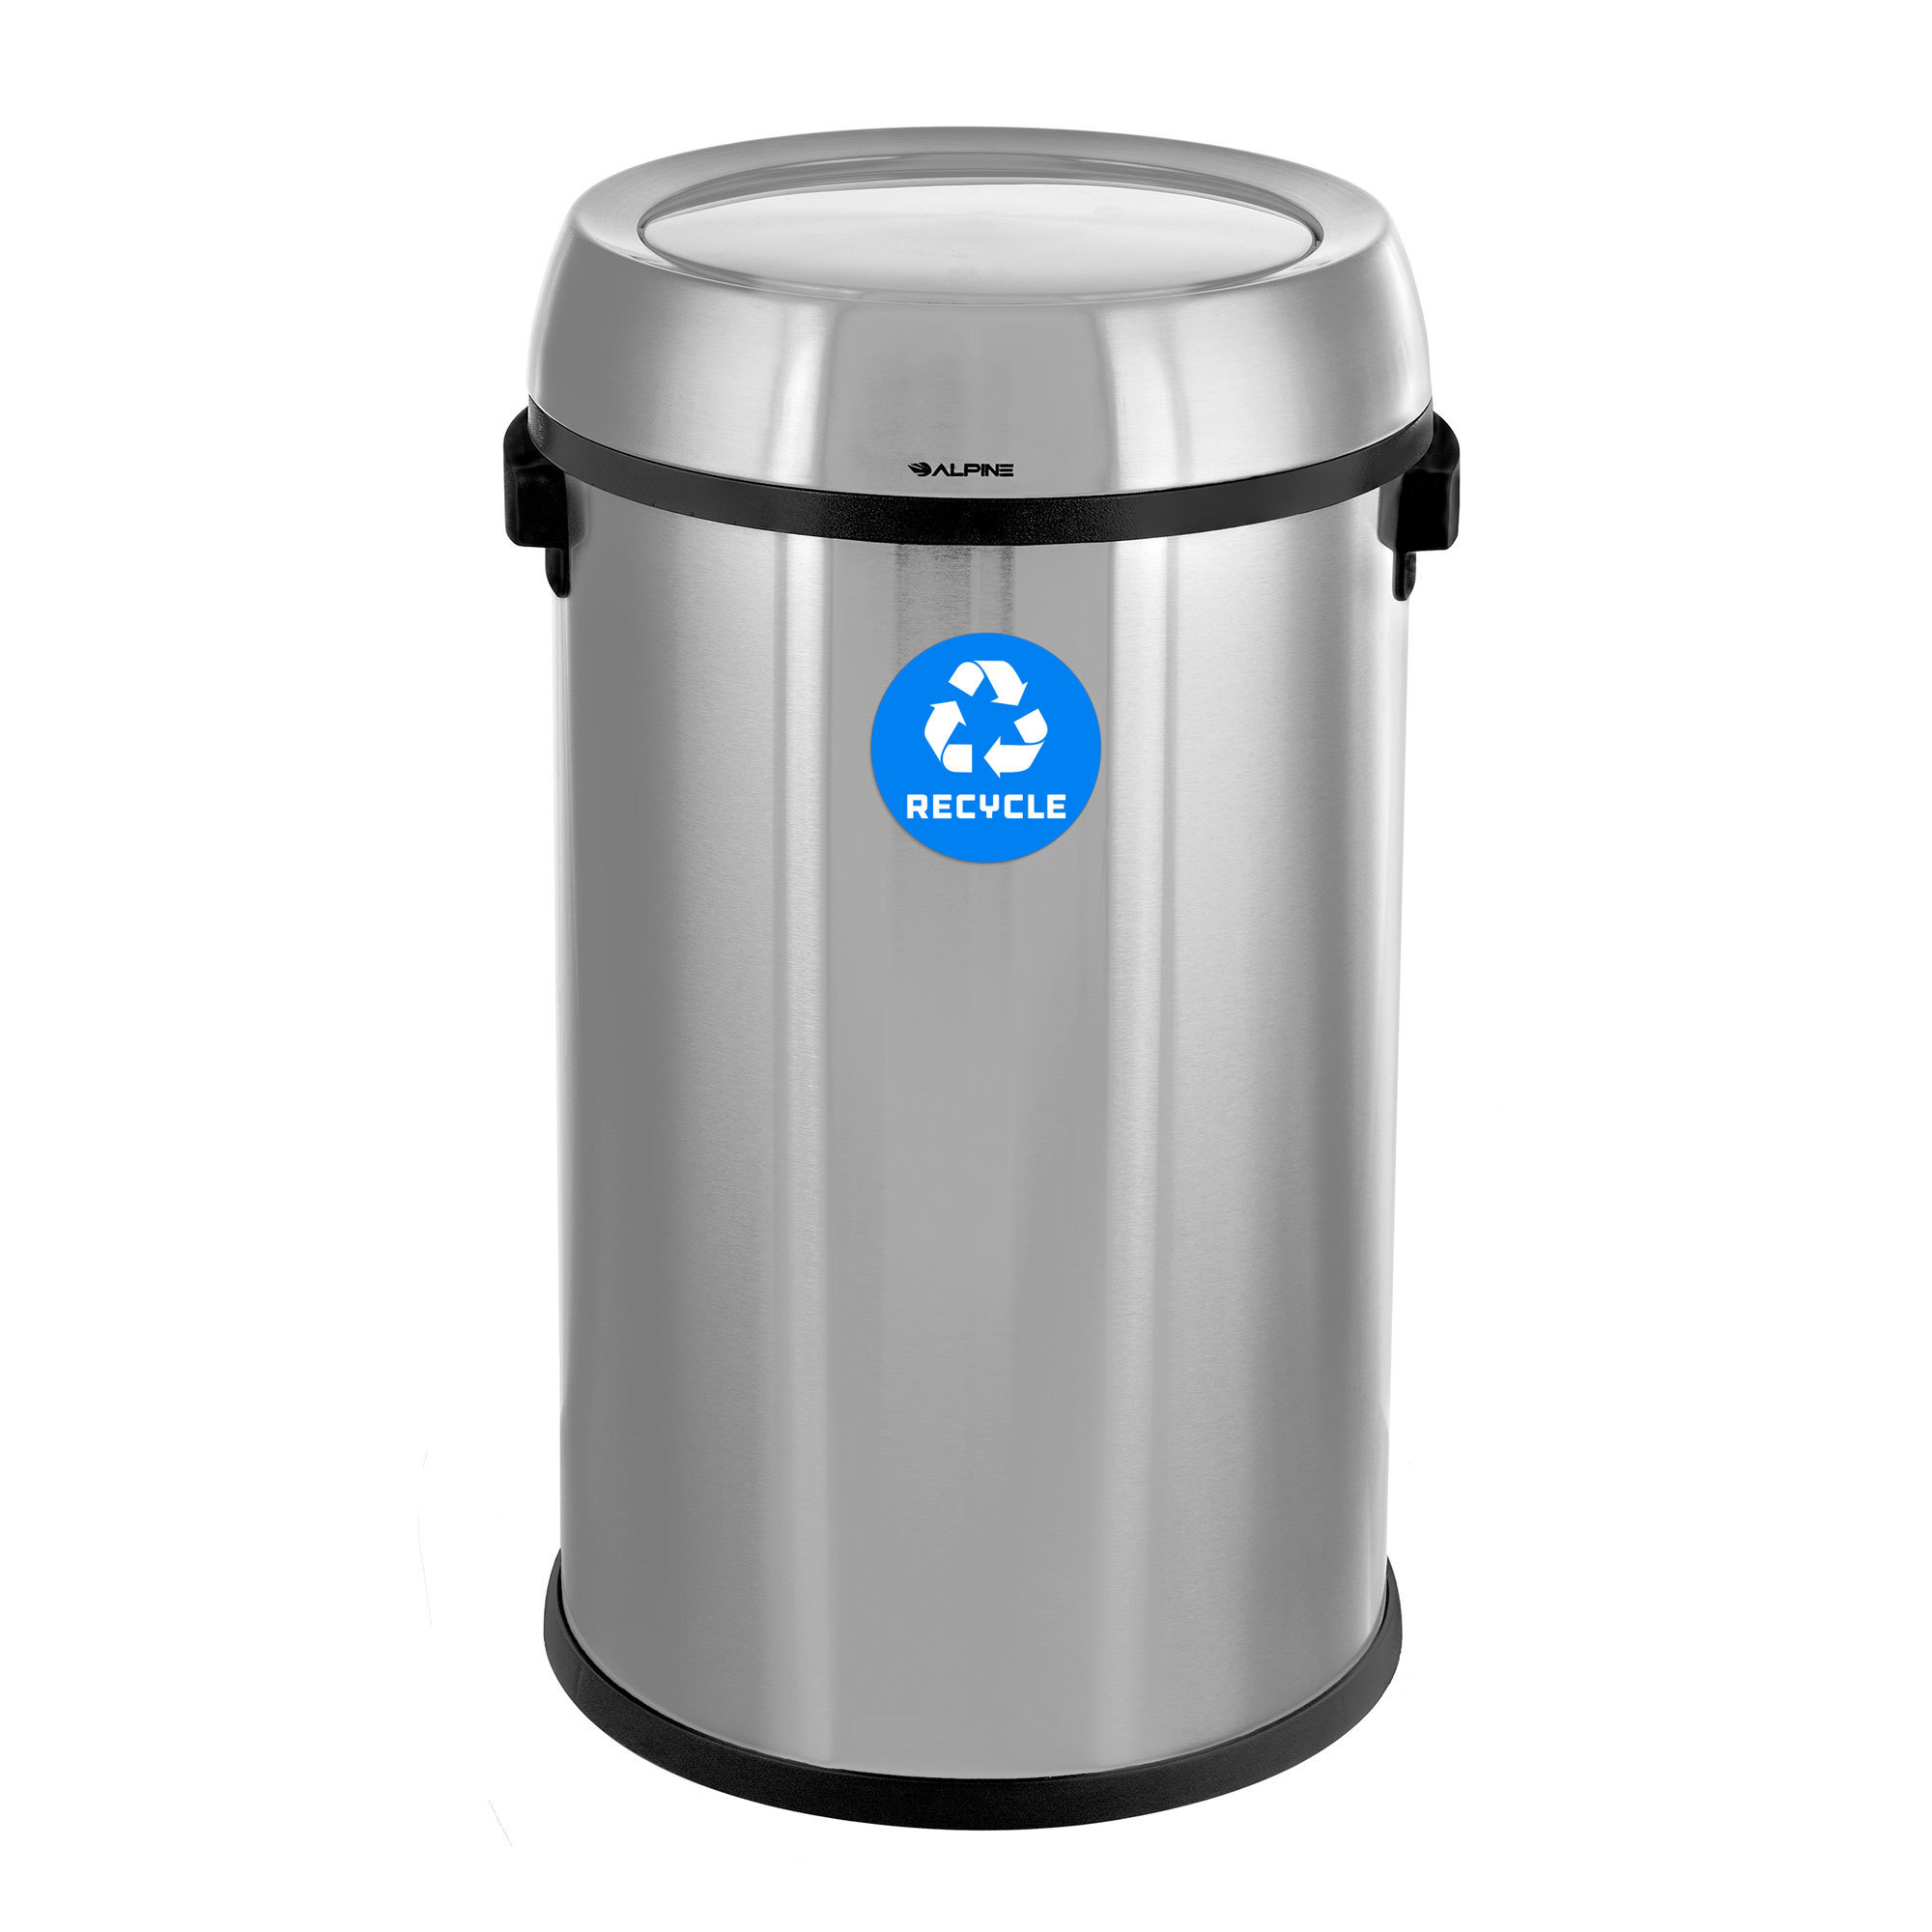 Alpine, 17-Gallon Stainless Steel Recycling Trash Can, Capacity 17 Gal, Model ALP470-65L-1-R